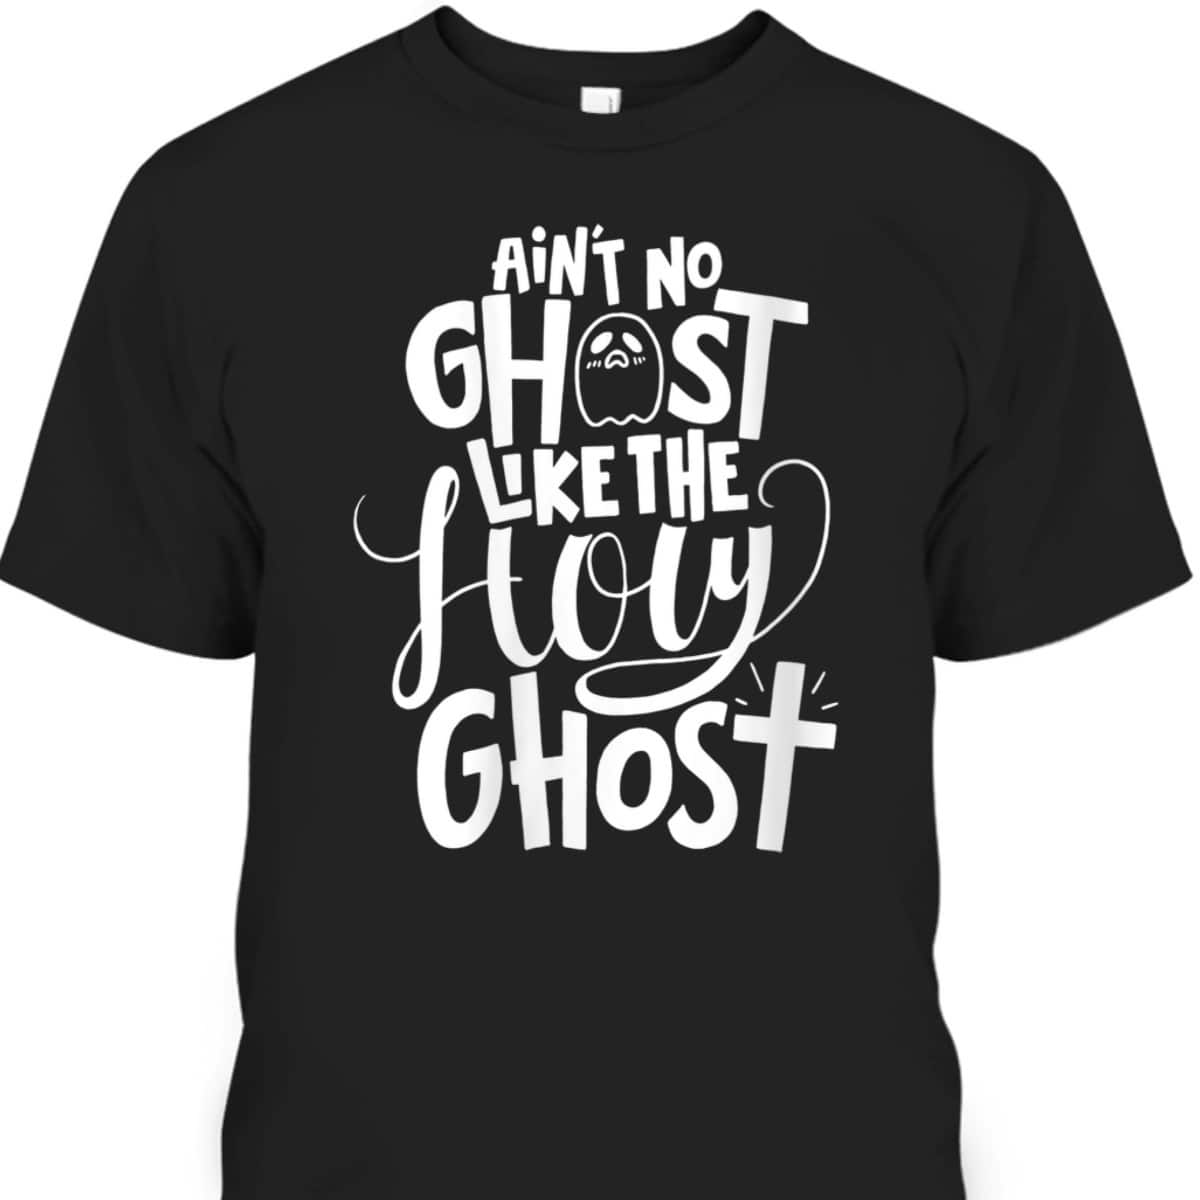 Ain't No Ghost Like The Holy Ghost Christian Halloween T-Shirt